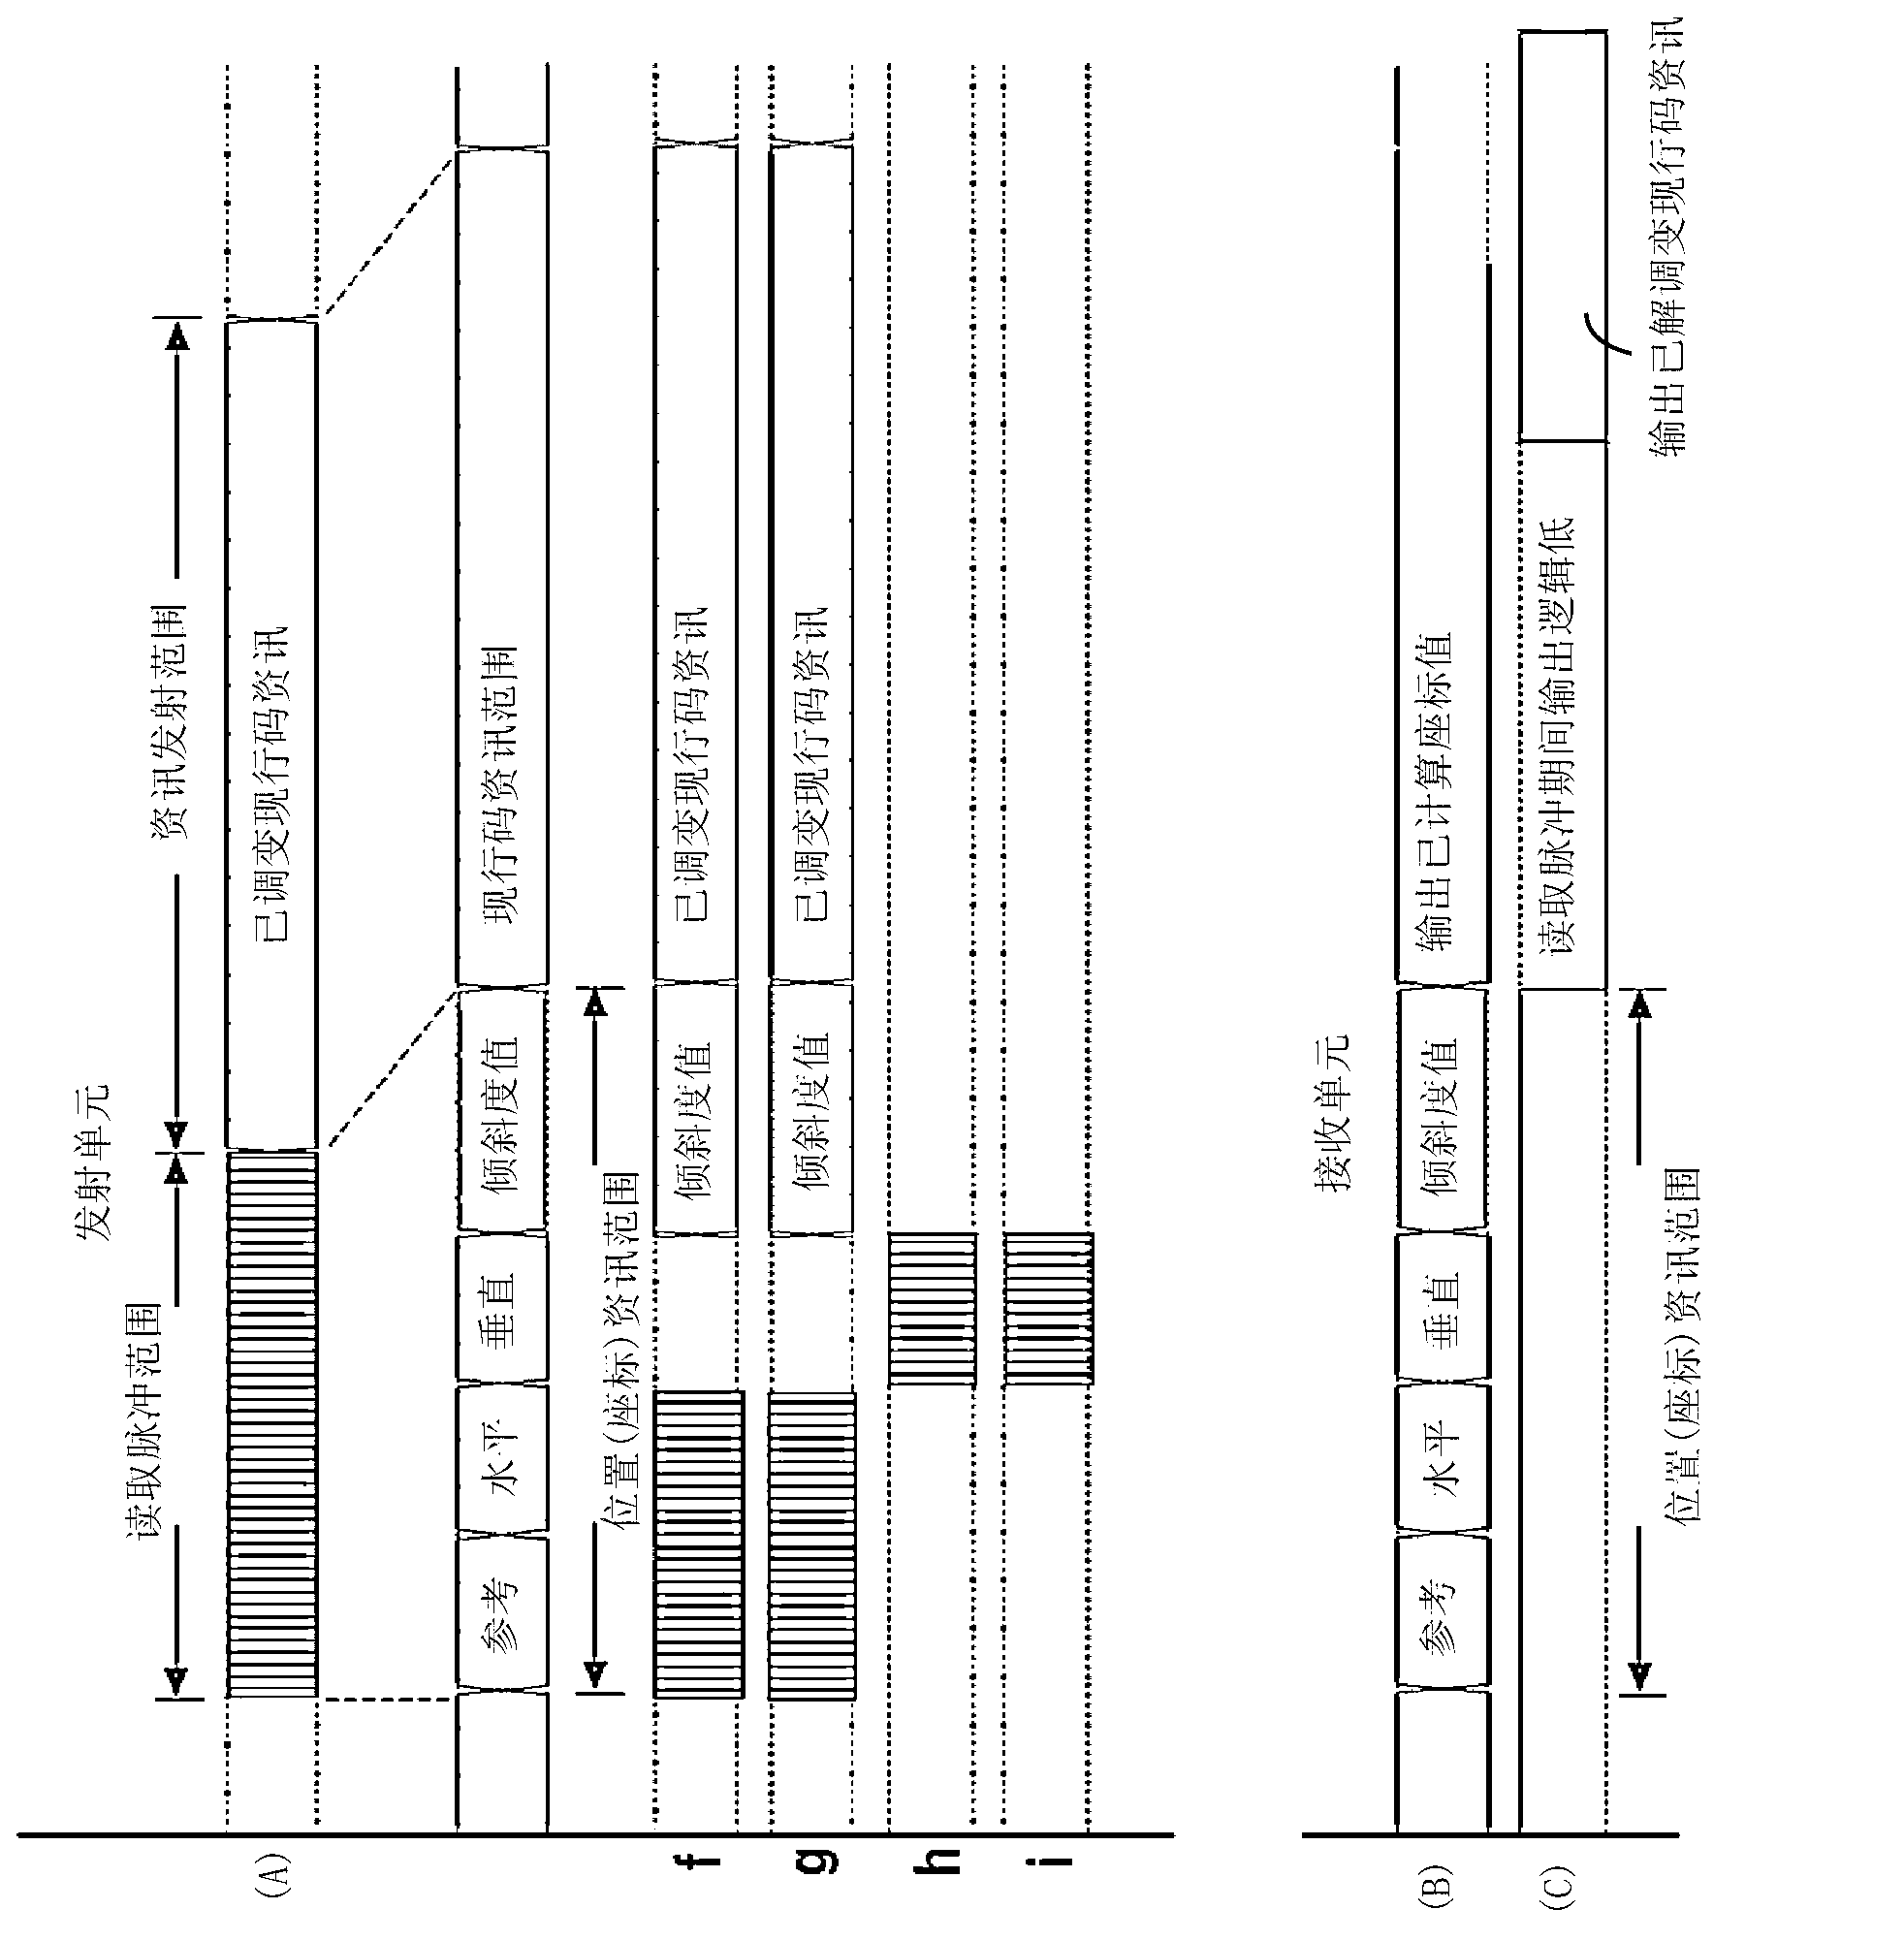 Transmission apparatus for remotely indicating position and reception apparatus